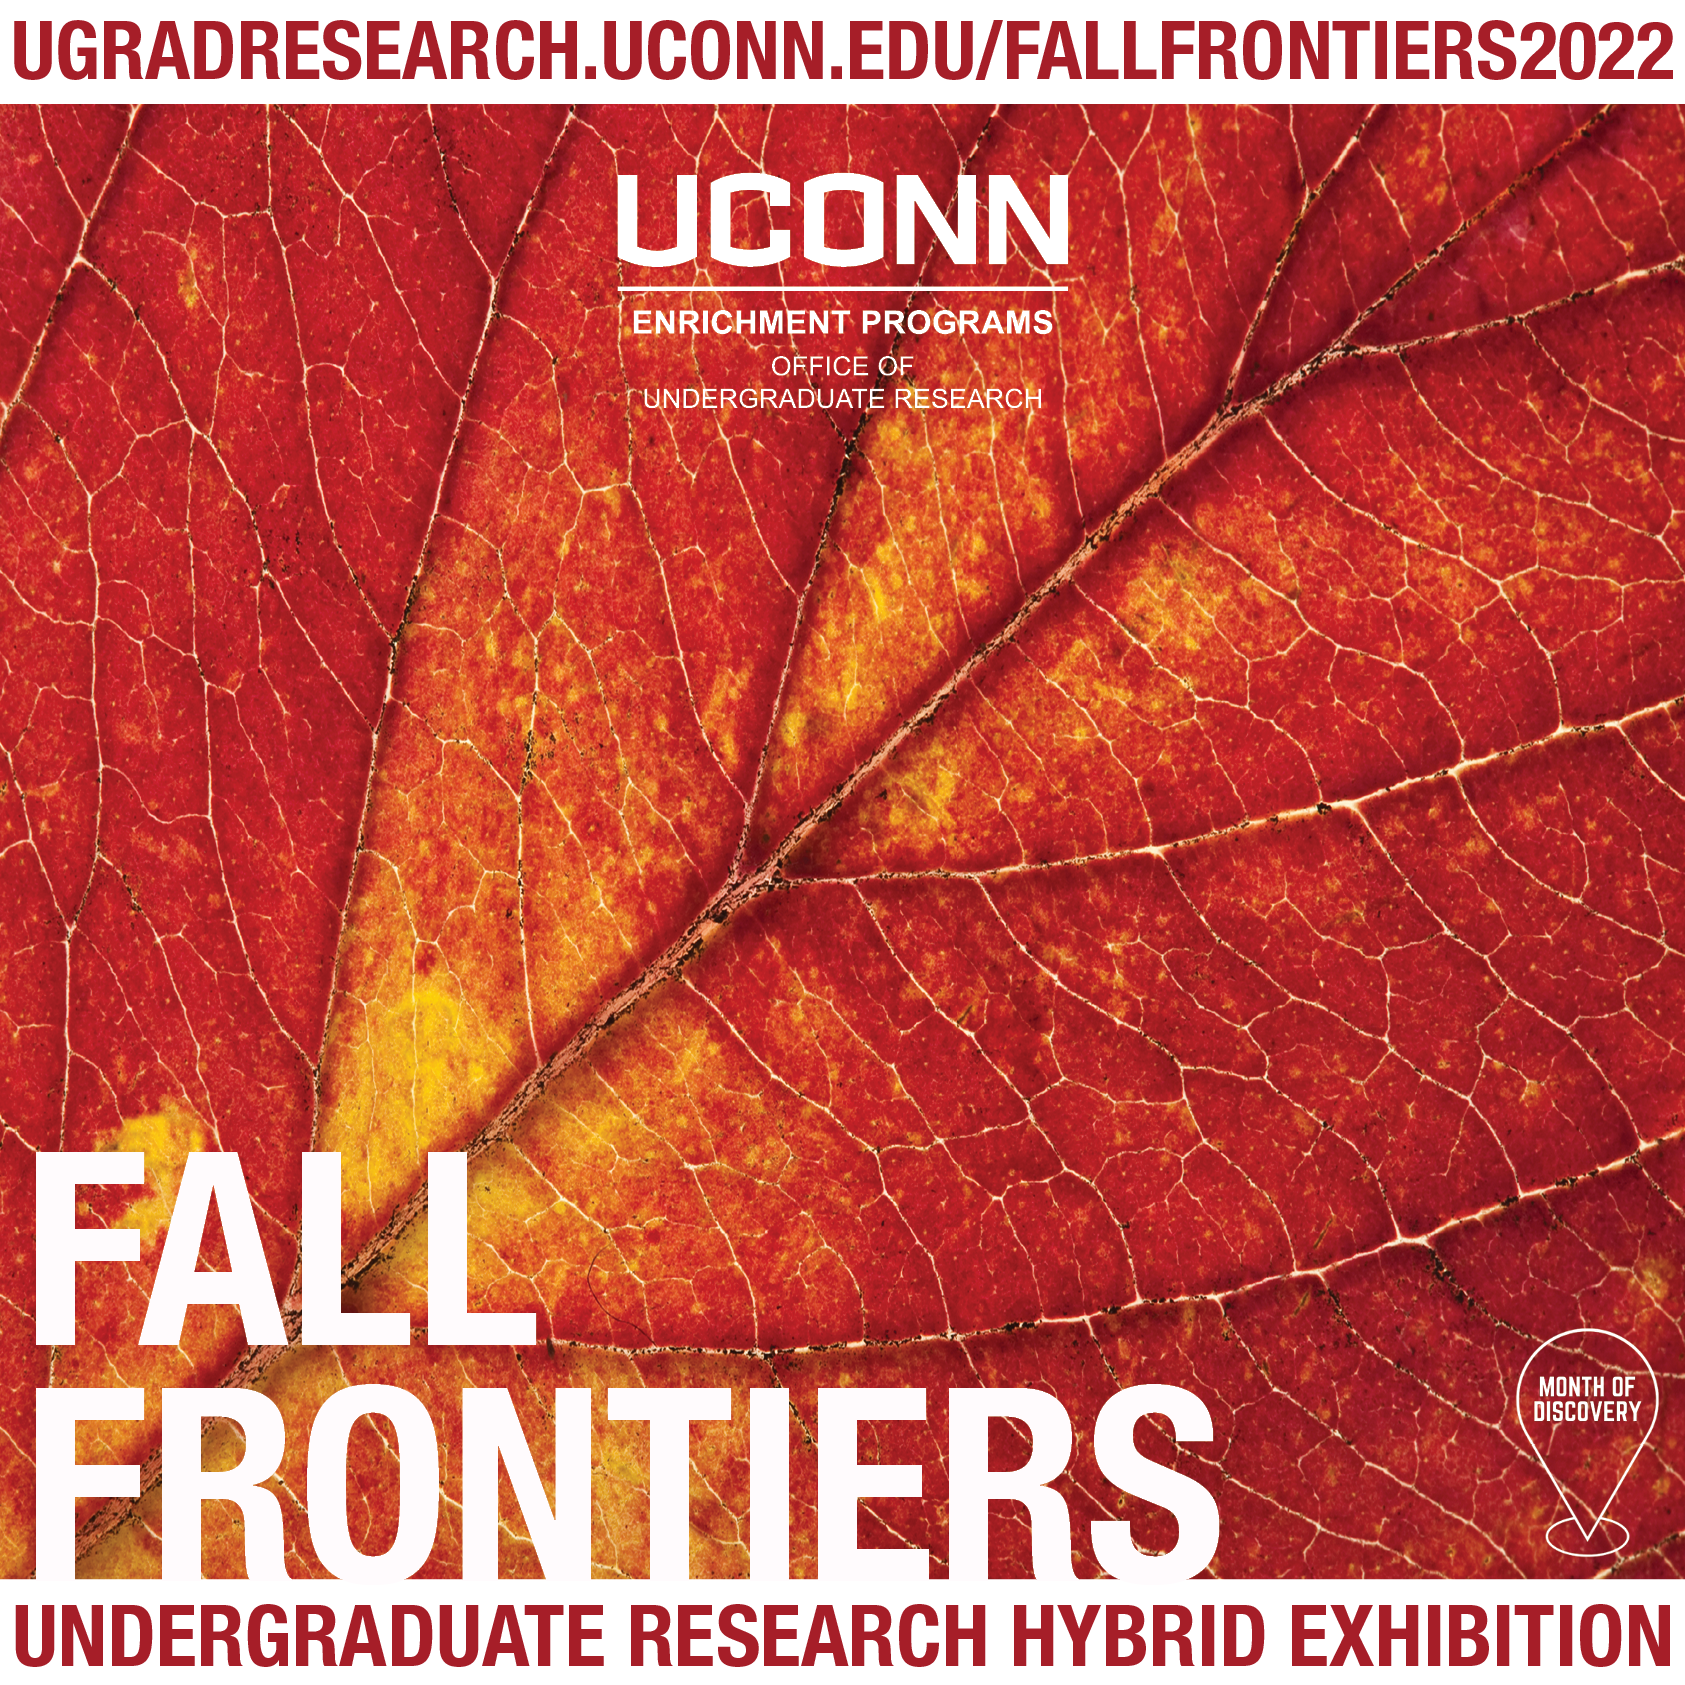 Over a close-up photo of a red and yellow leaf, text reads, Fall Frontiers Undergraduate Research Poster Exhibition, ugradresearch.uconn.edu/fallfrontiers2022